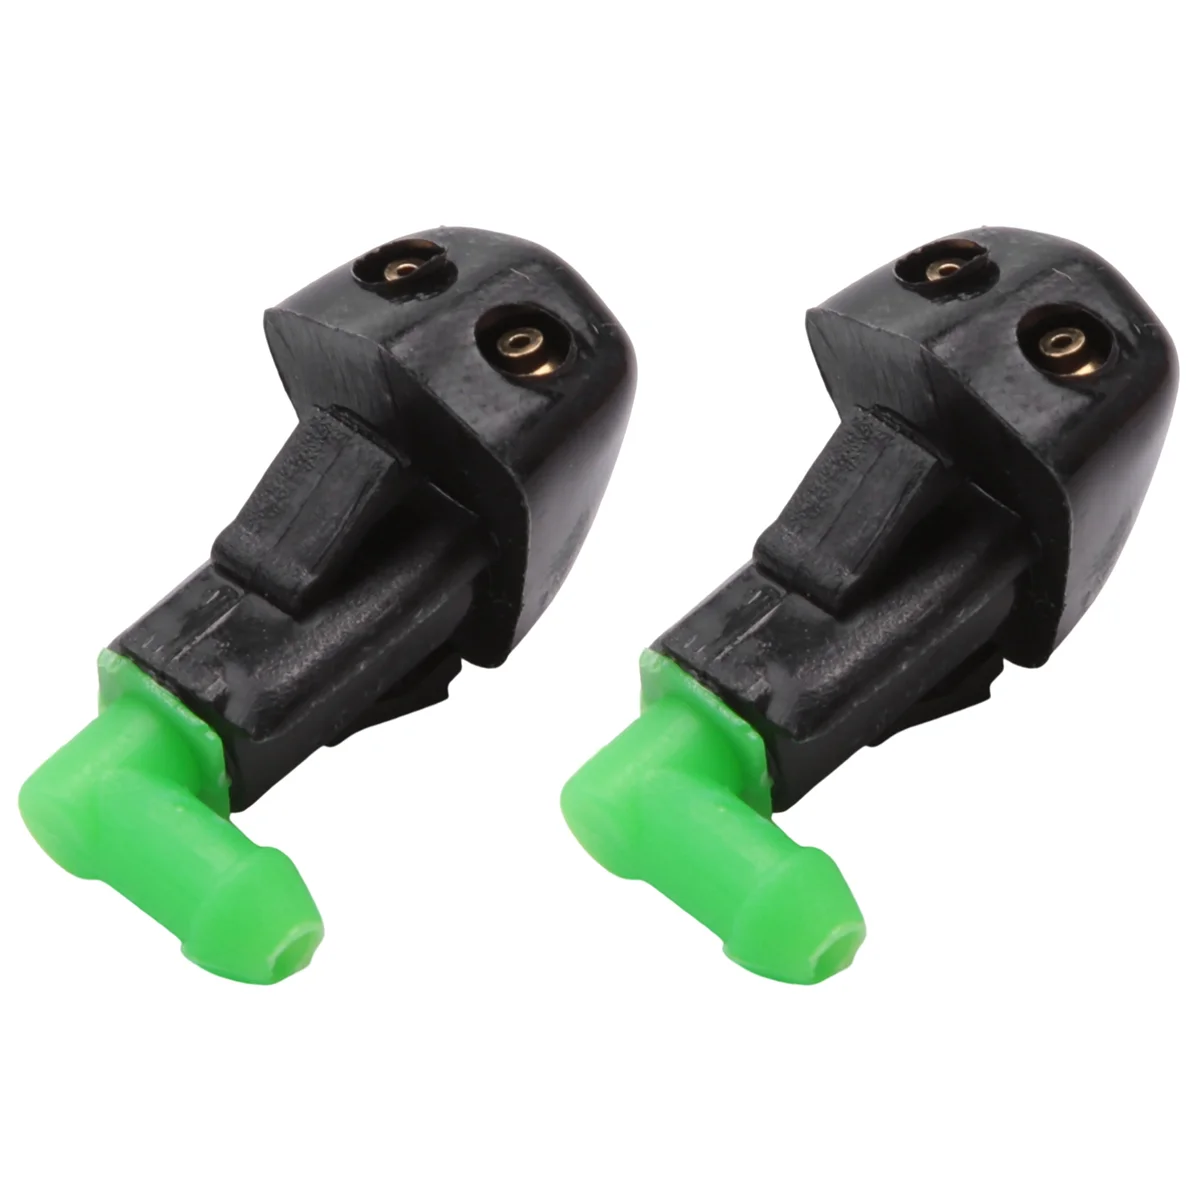 1Pair for Honda for Accord 1998 1999 2000 2001 2002 Windshield Washer Wiper Nozzle Sprayer 76810-S84-C02